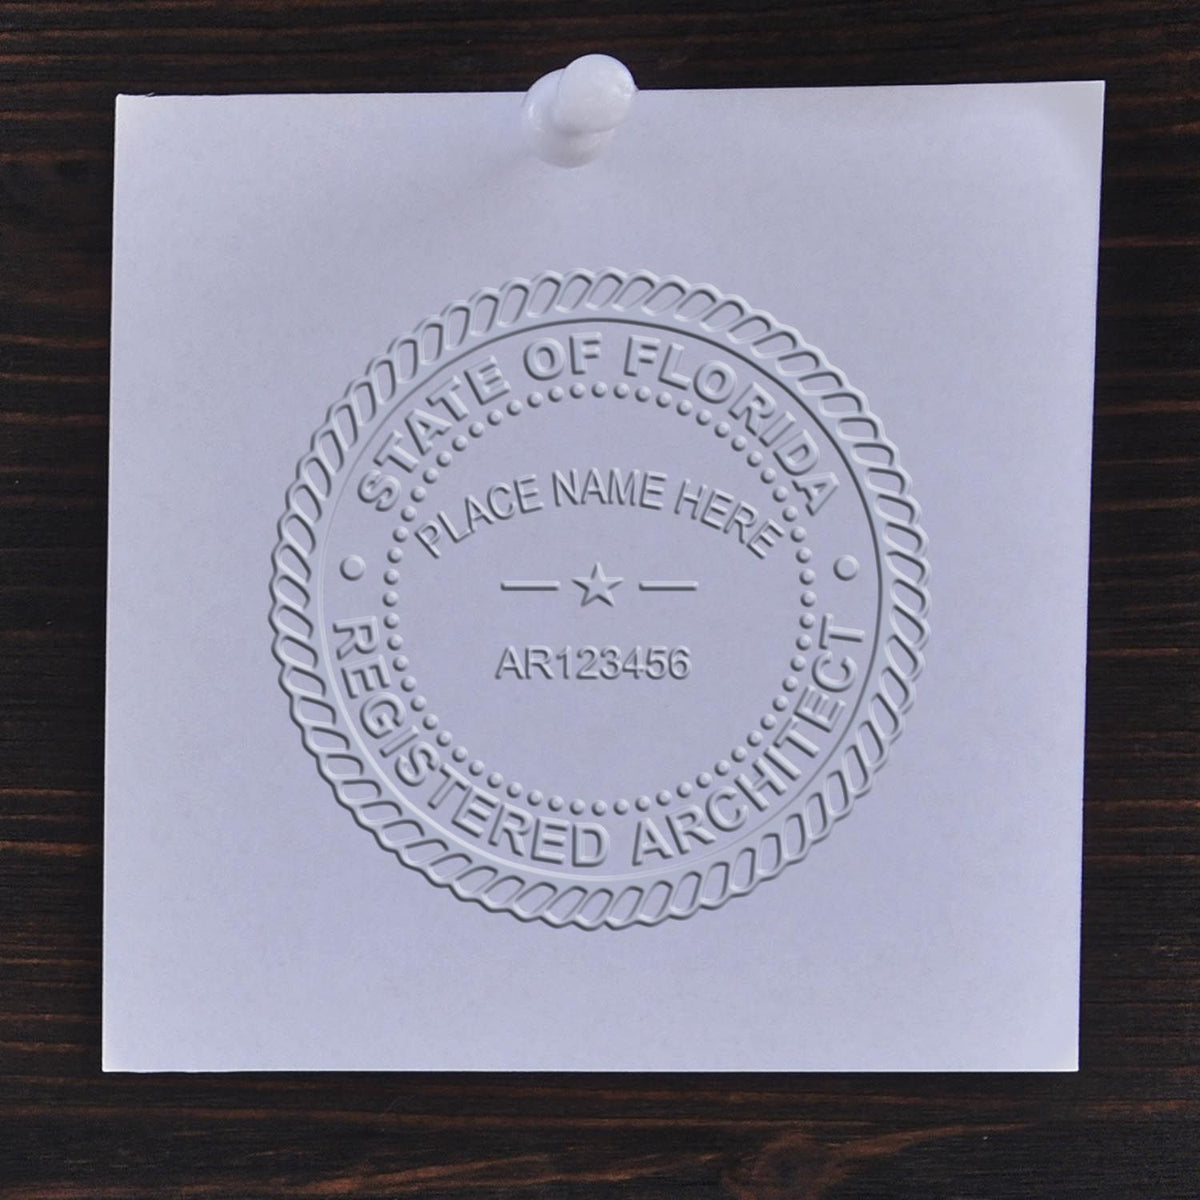 A stamped impression of the Florida Desk Architect Embossing Seal in this stylish lifestyle photo, setting the tone for a unique and personalized product.